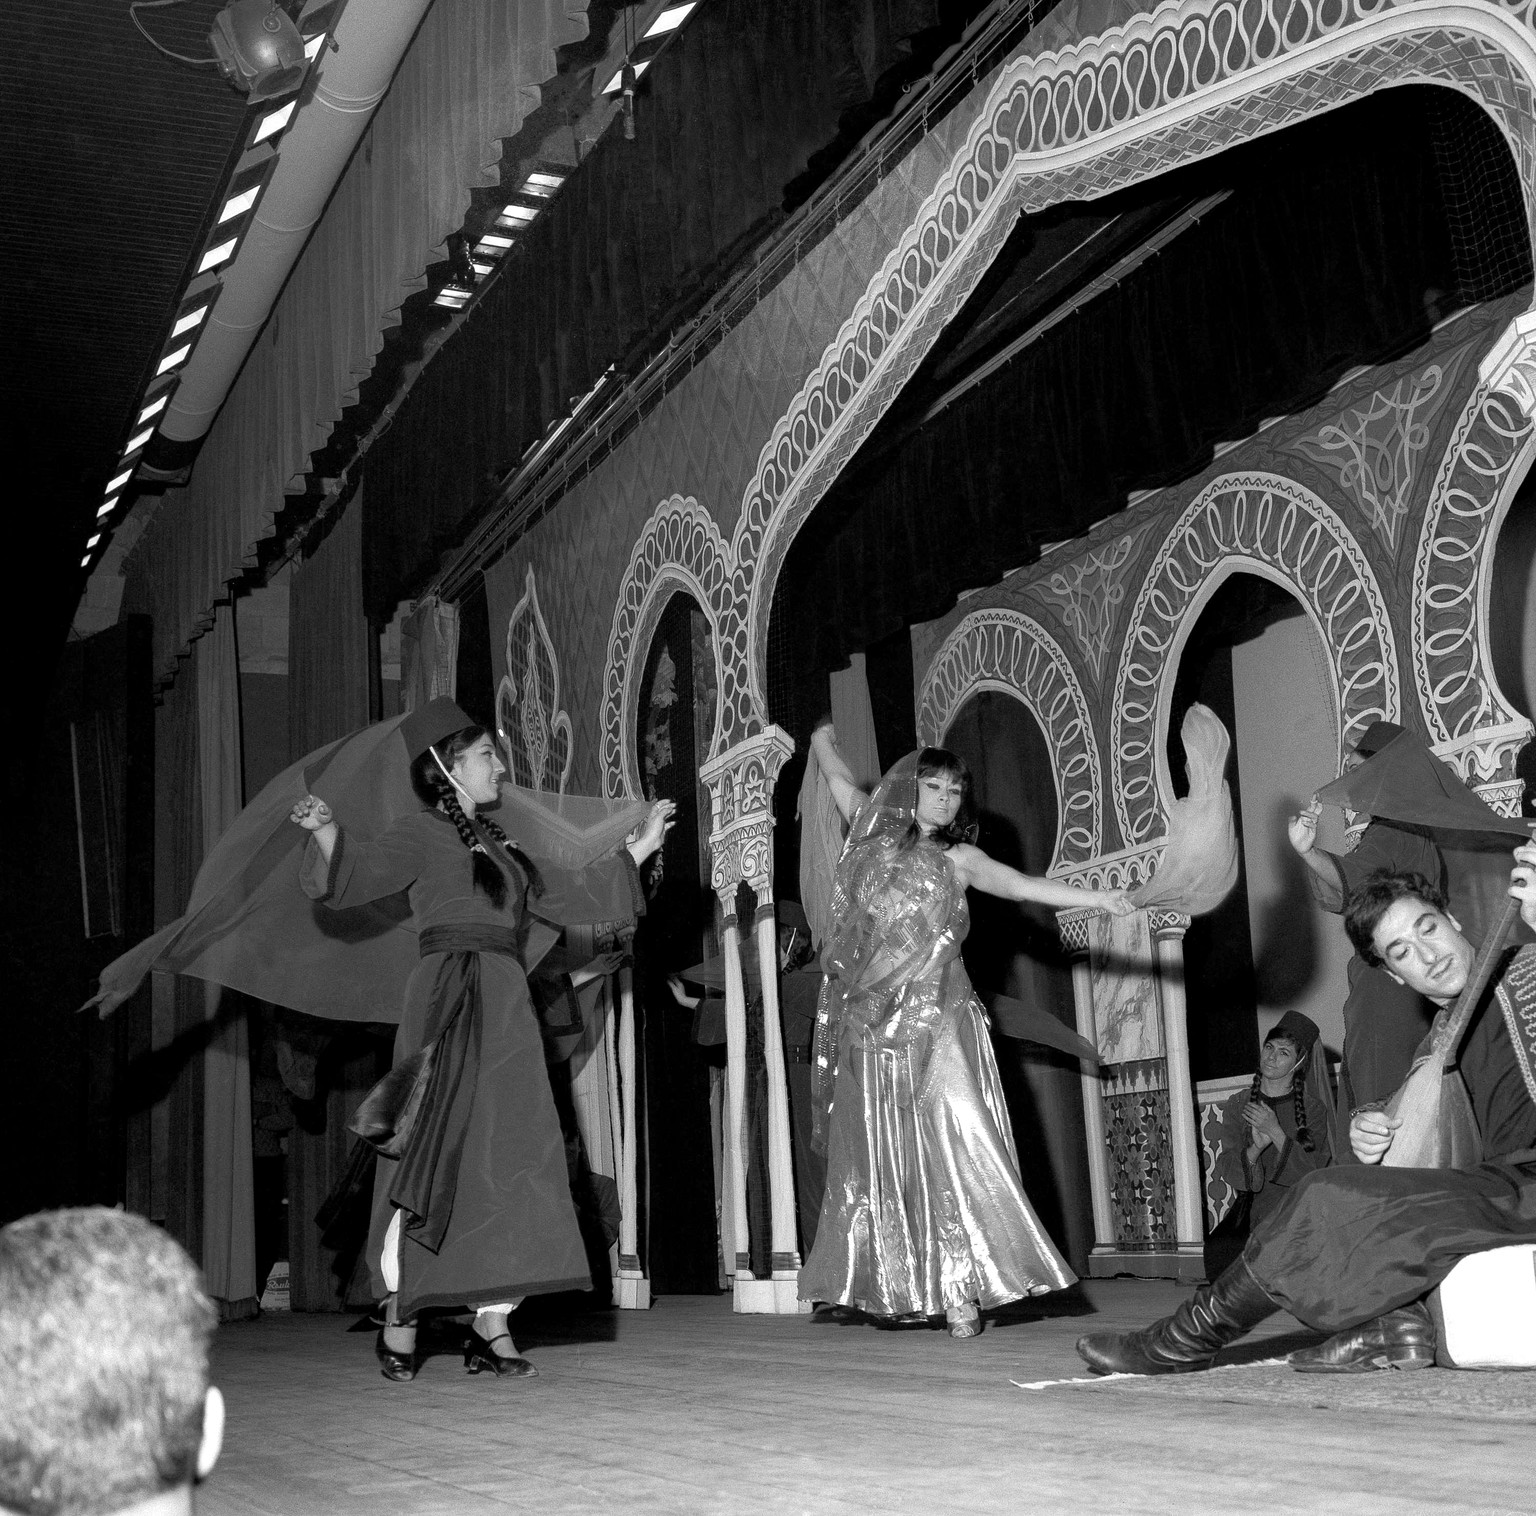 Number one belly dancer in Beirut, the belly dancing capital of the Arab world, is not an Arab but 26-year-old American Jemela Omar of New York City, shown April 2, 1966. She stars in a Lebanese folk  ...